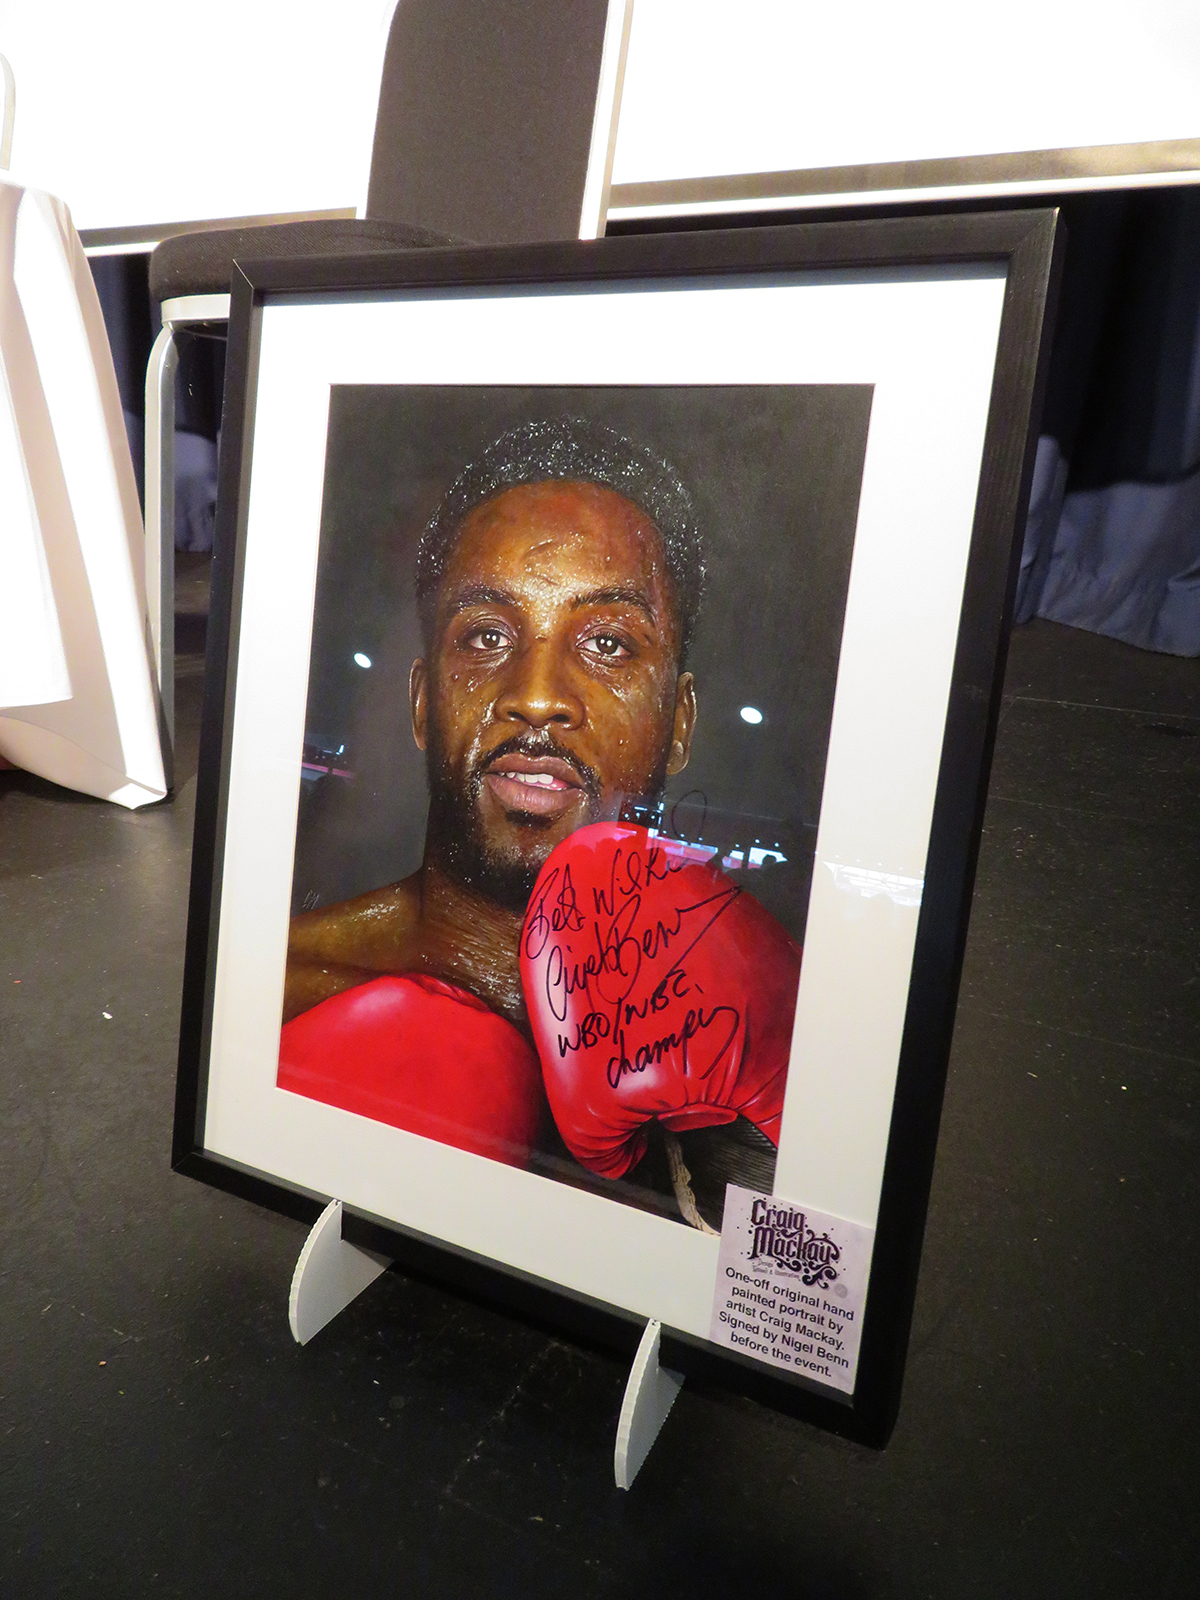 Here is a painted portrait I recently did of Nigel Benn for an evening with Nigel Benn at Walsall Football club. This was signed by the man himself and auctioned off on the night. Medium: Acrylics on art board. By Craig Mackay.